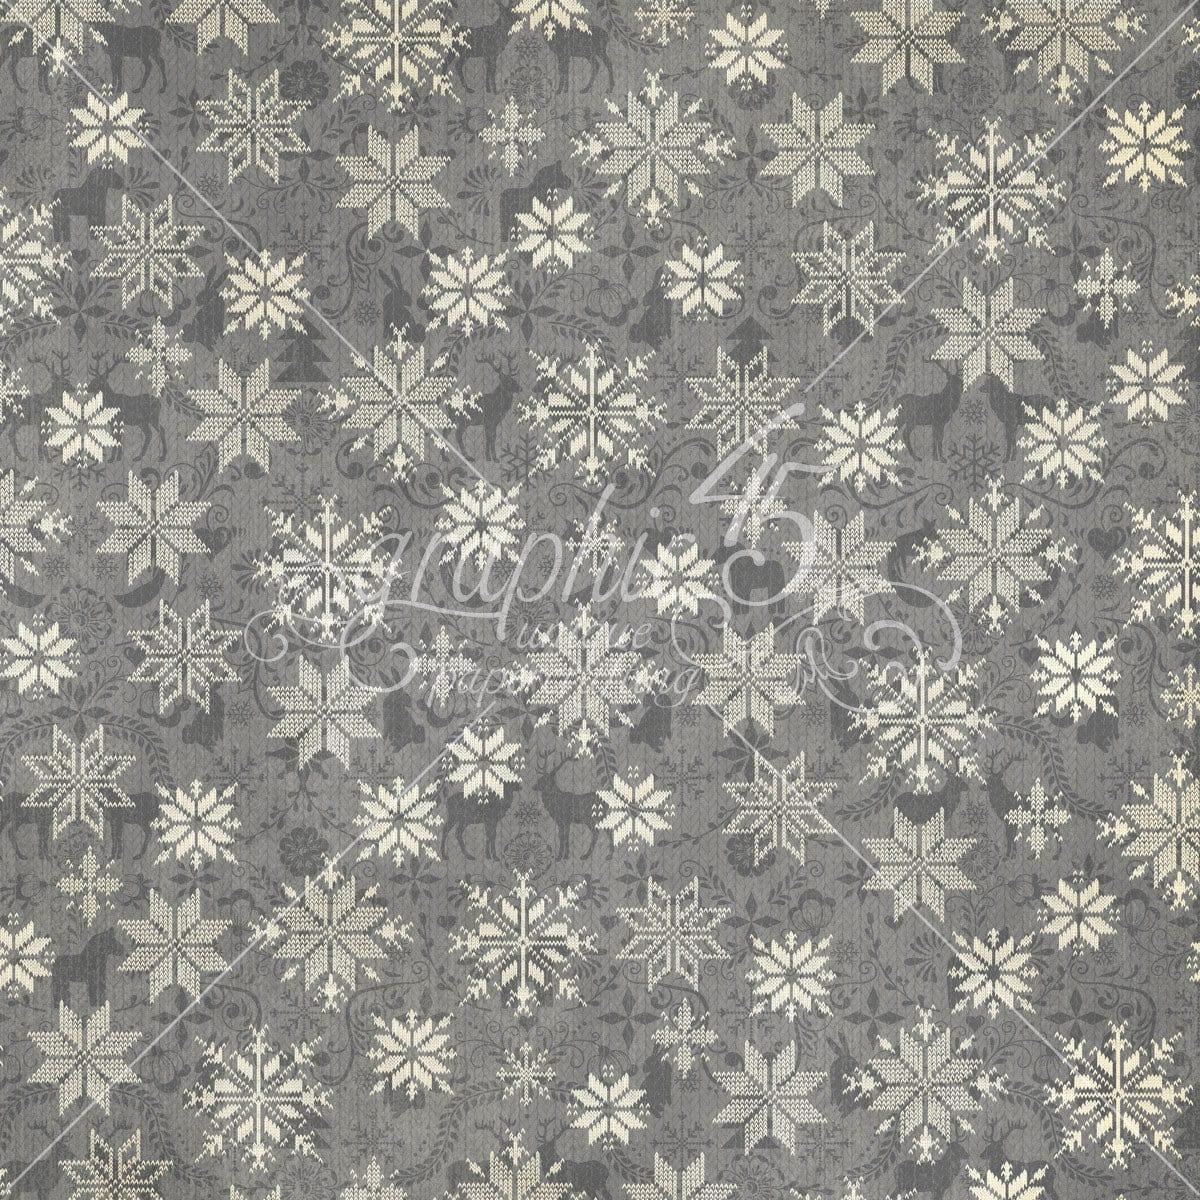 Let's Get Cozy Collection Take Time to Chill 12 x 12 Double-Sided Scrapbook Paper by Graphic 45 - Scrapbook Supply Companies